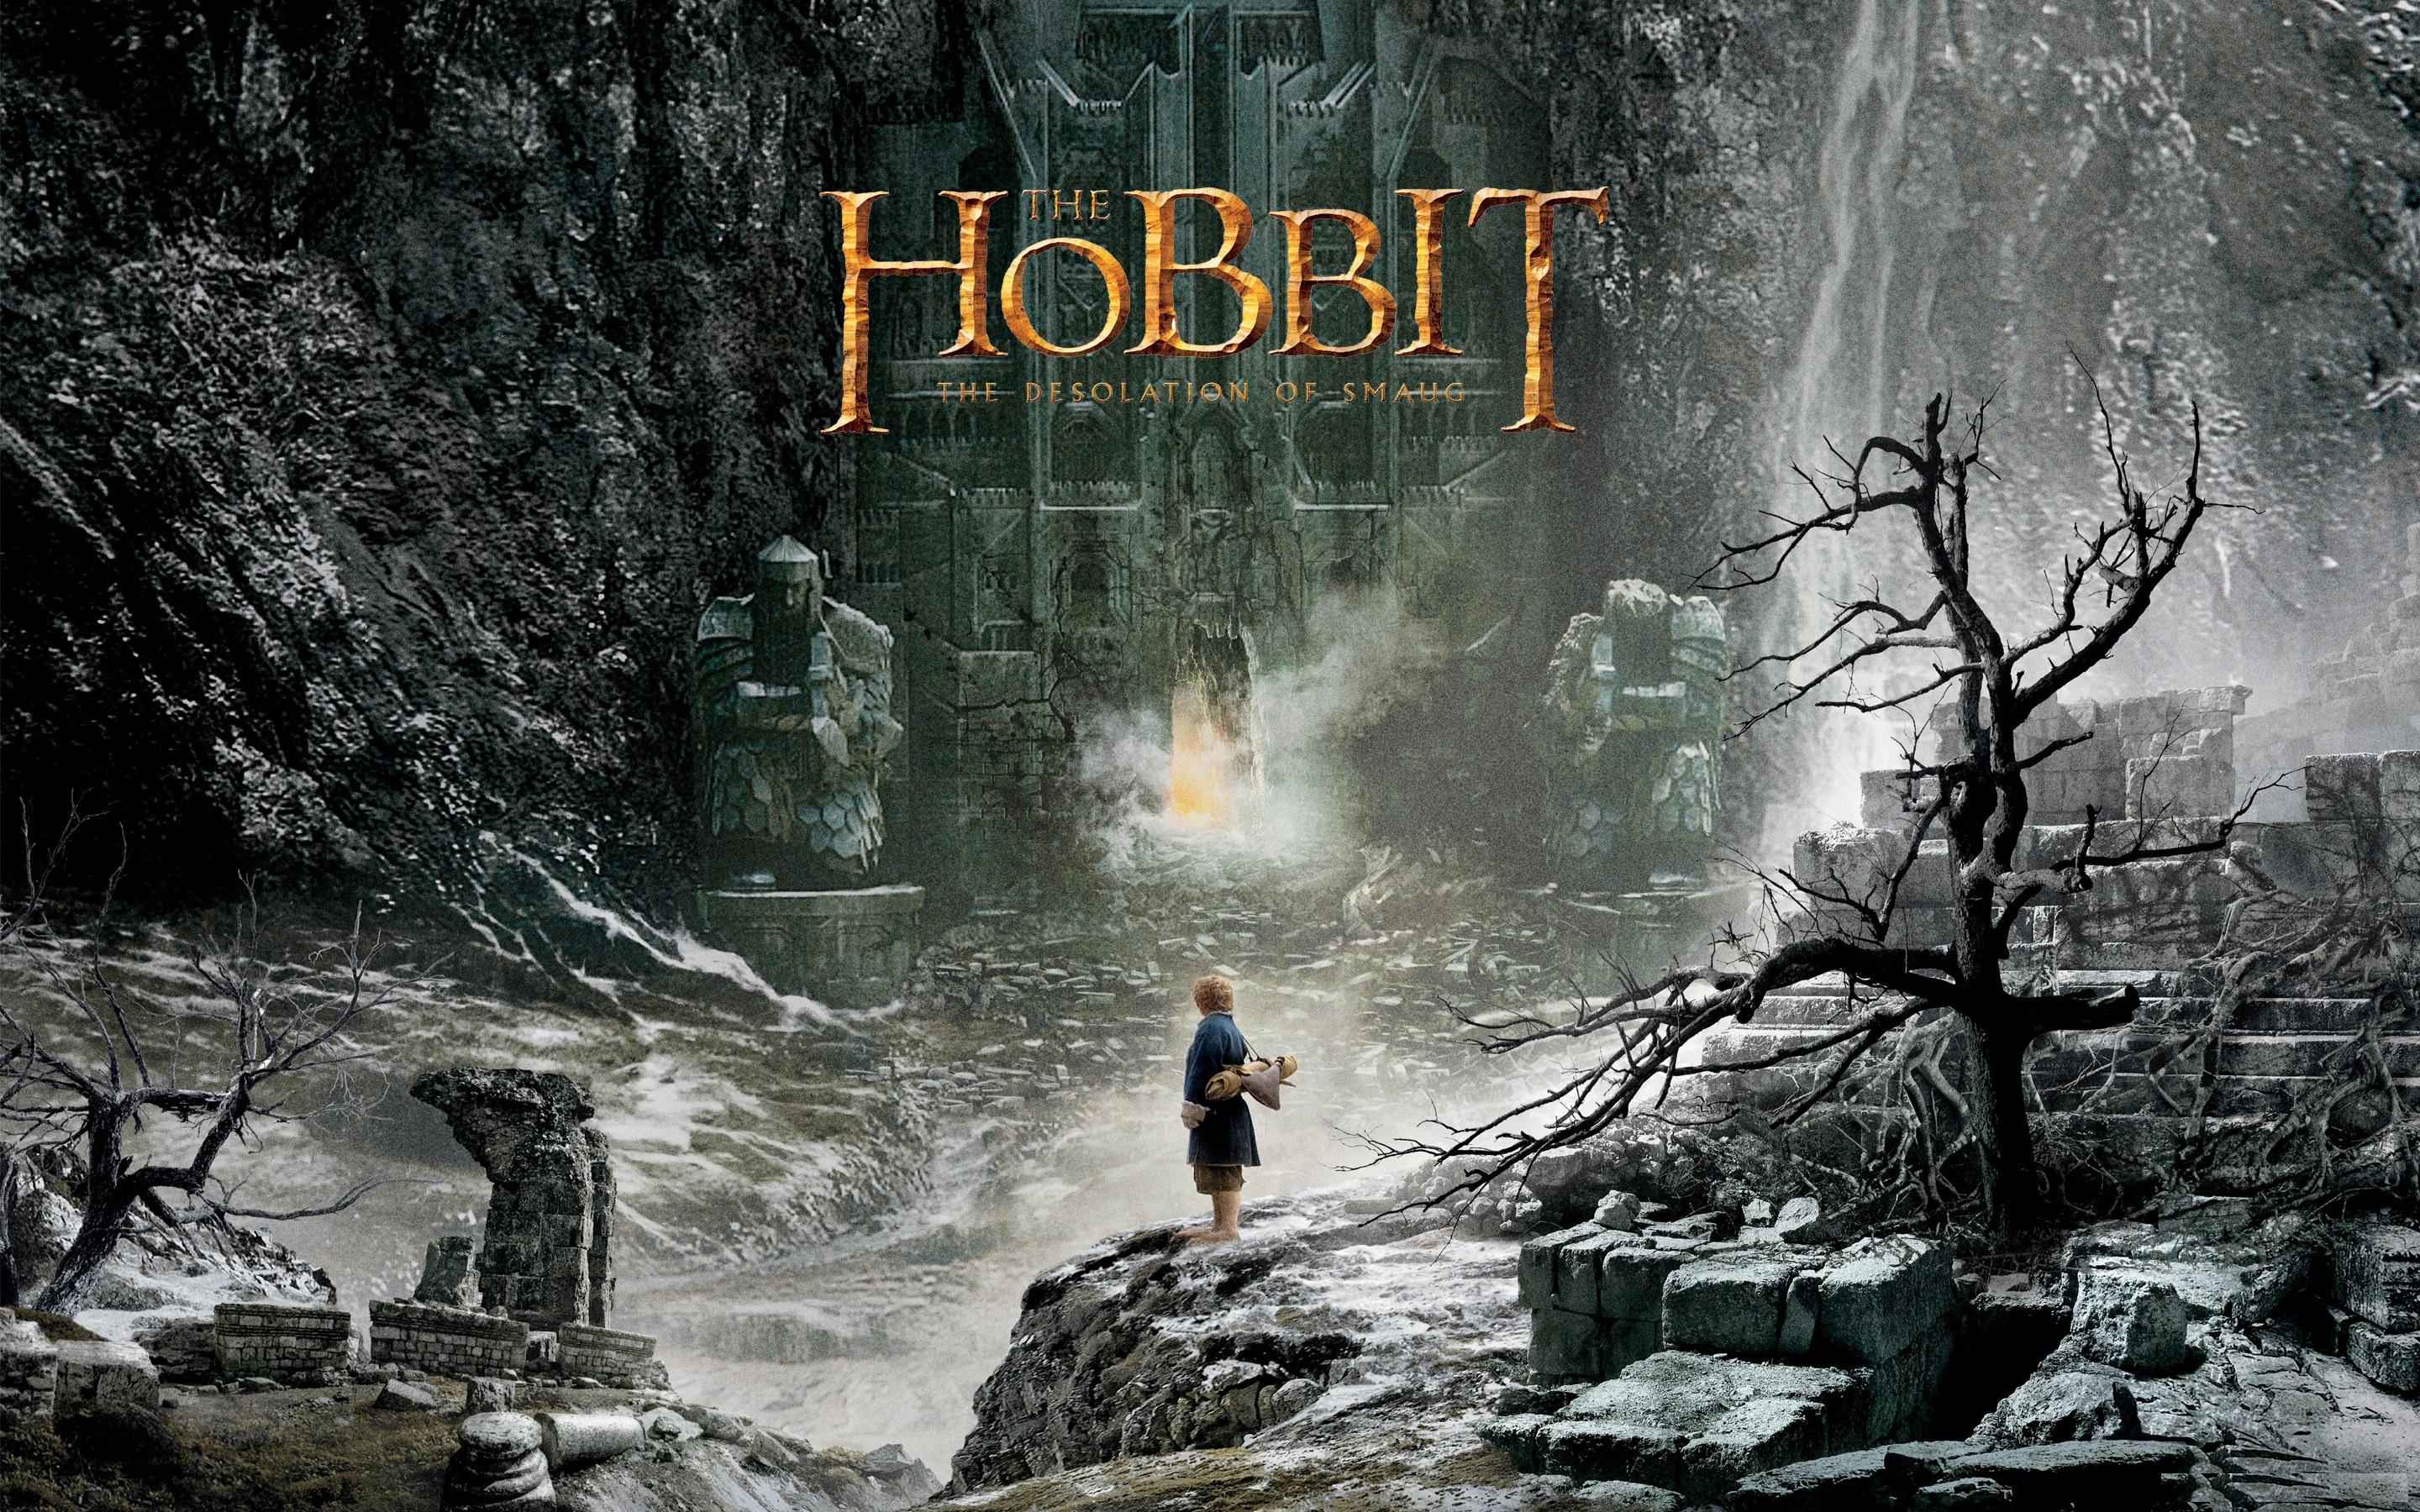 The hobbit the desolation of smaug high definition wallpapers ...